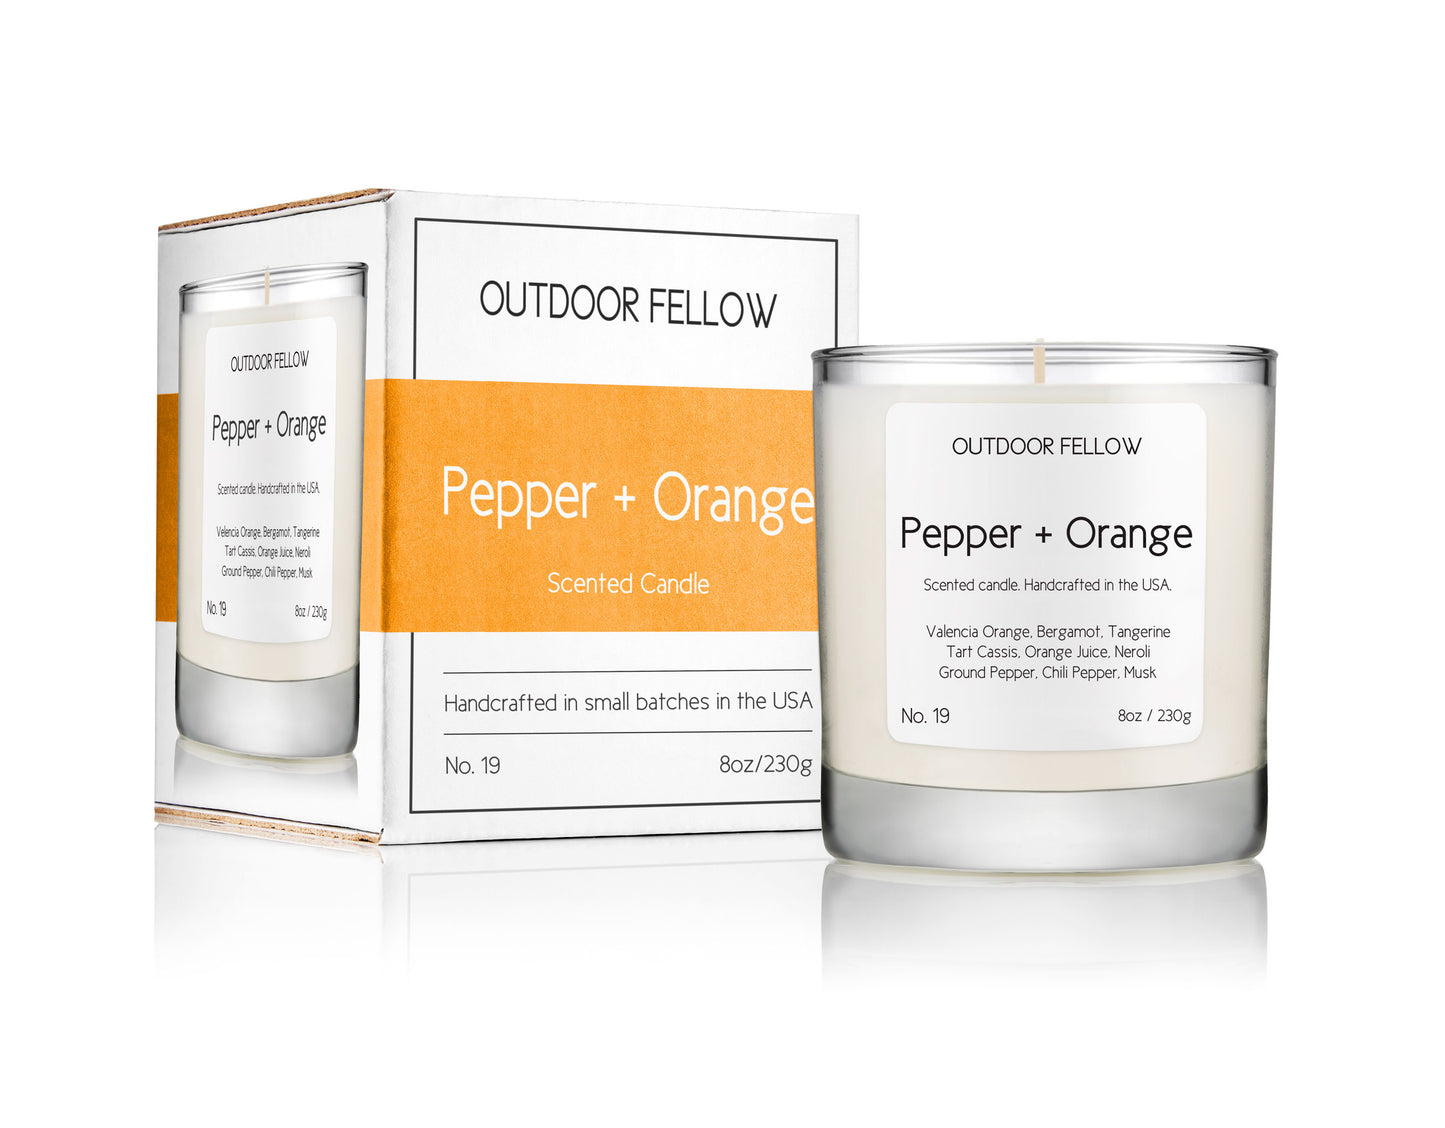 Pepper and Orange scented candle next to packaging on white background